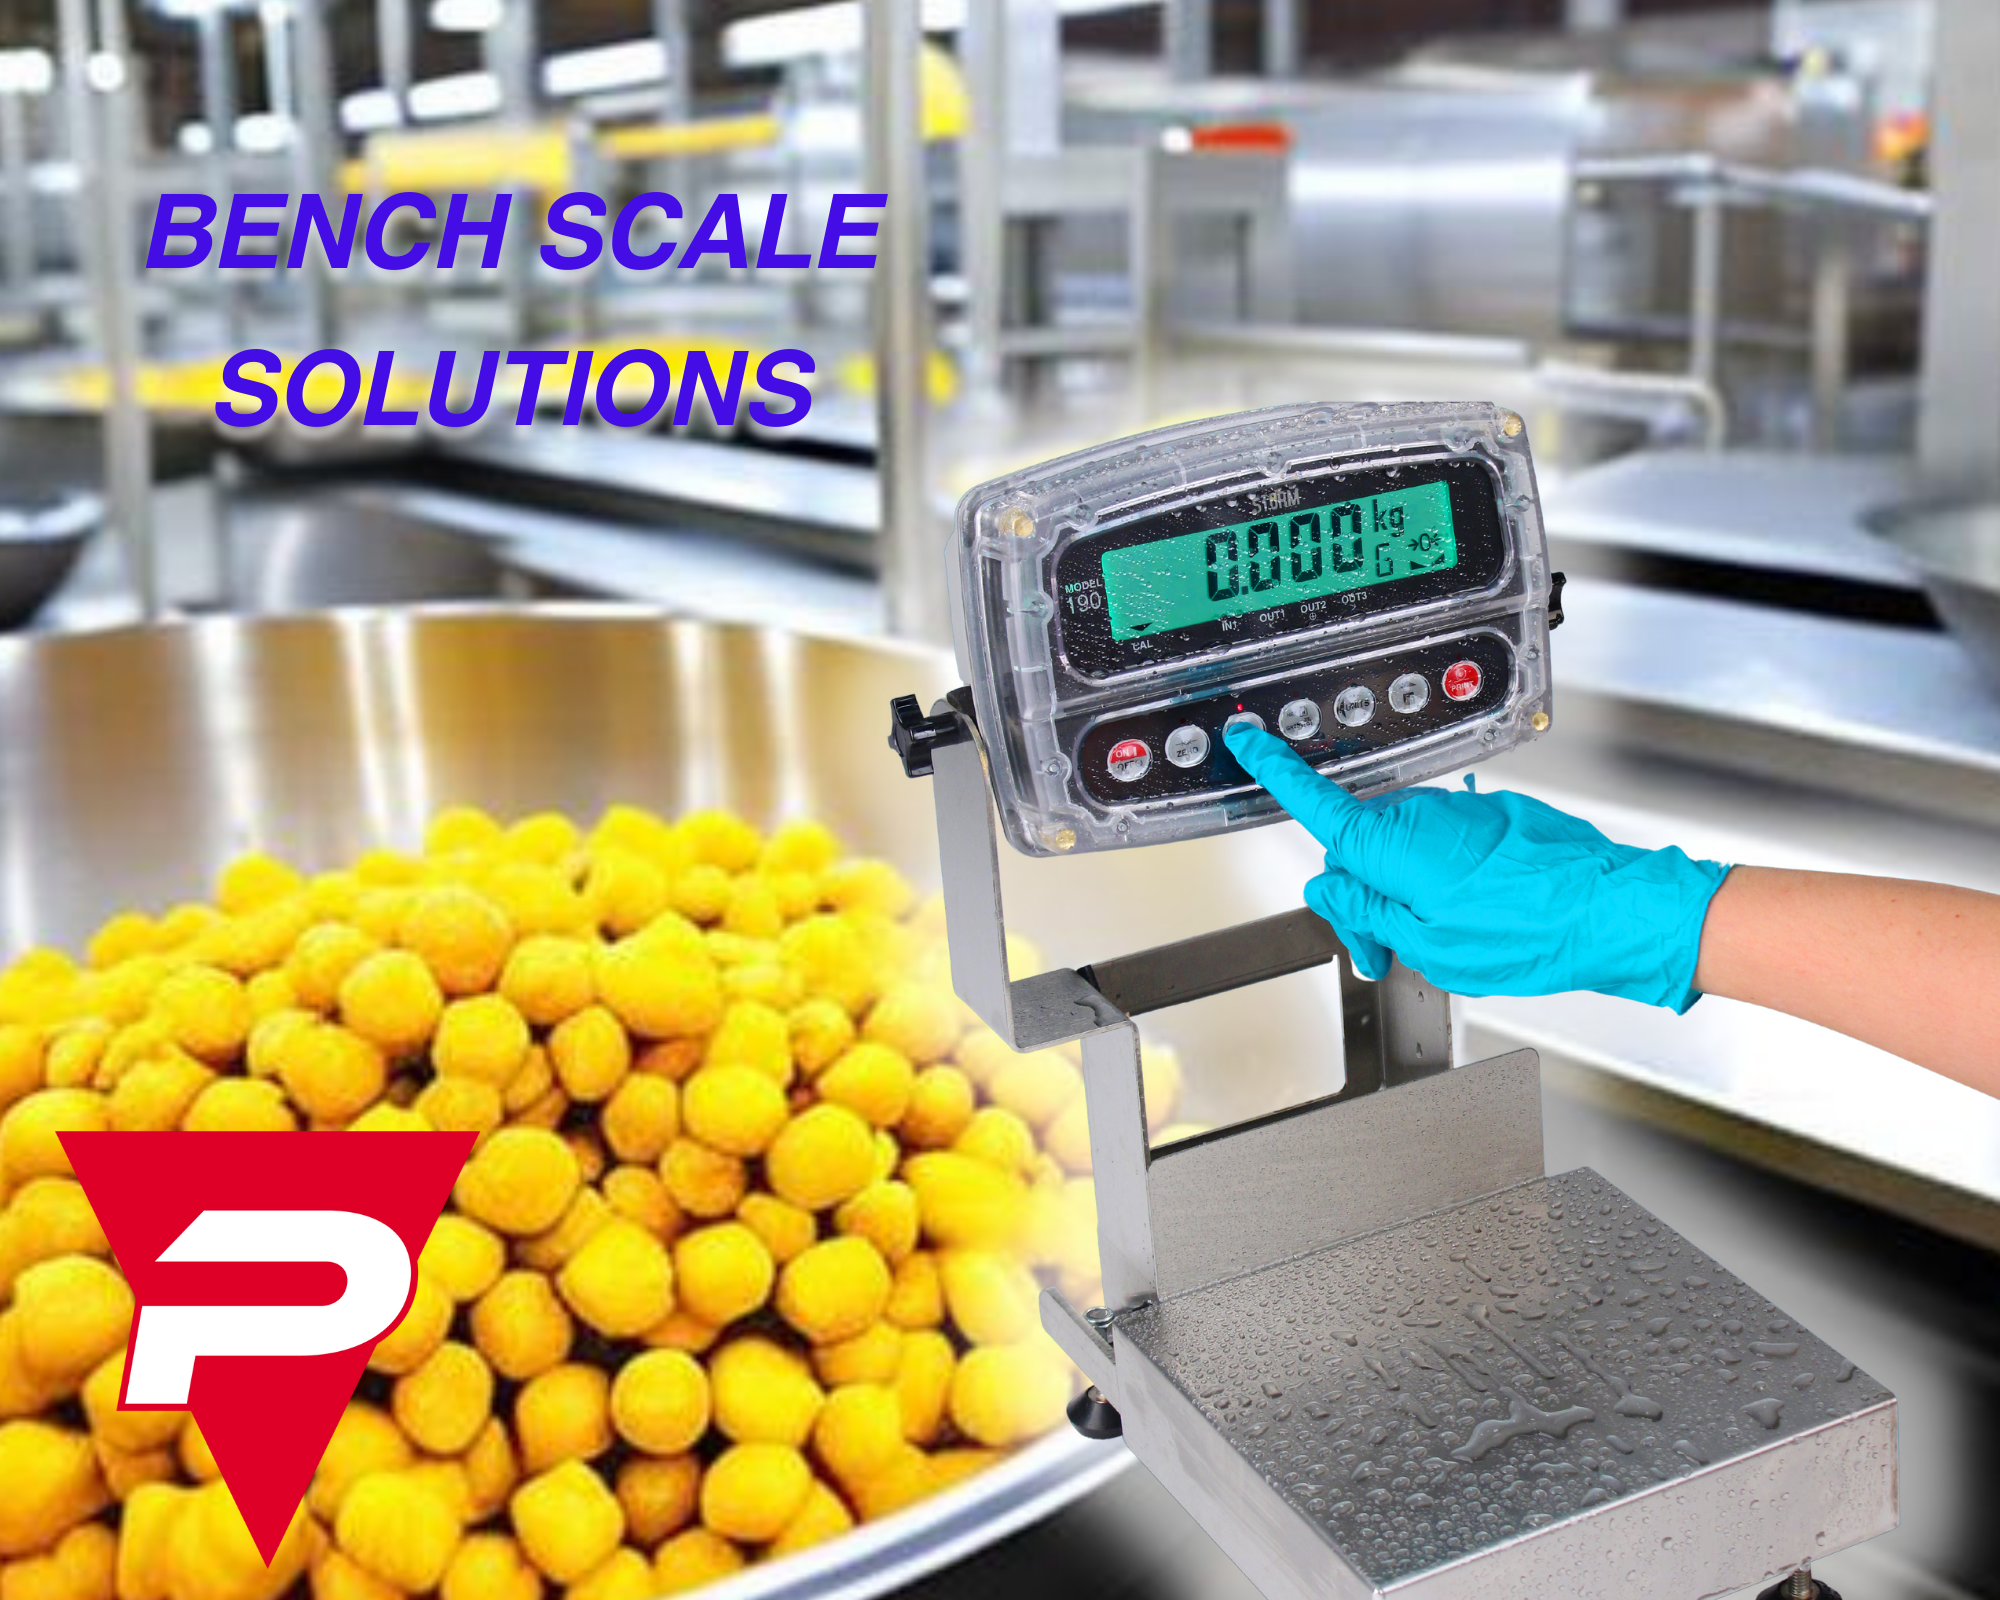 Pioneer Scale industrial grade bench scales for food processing, chemicals and other industrial manufacturing.